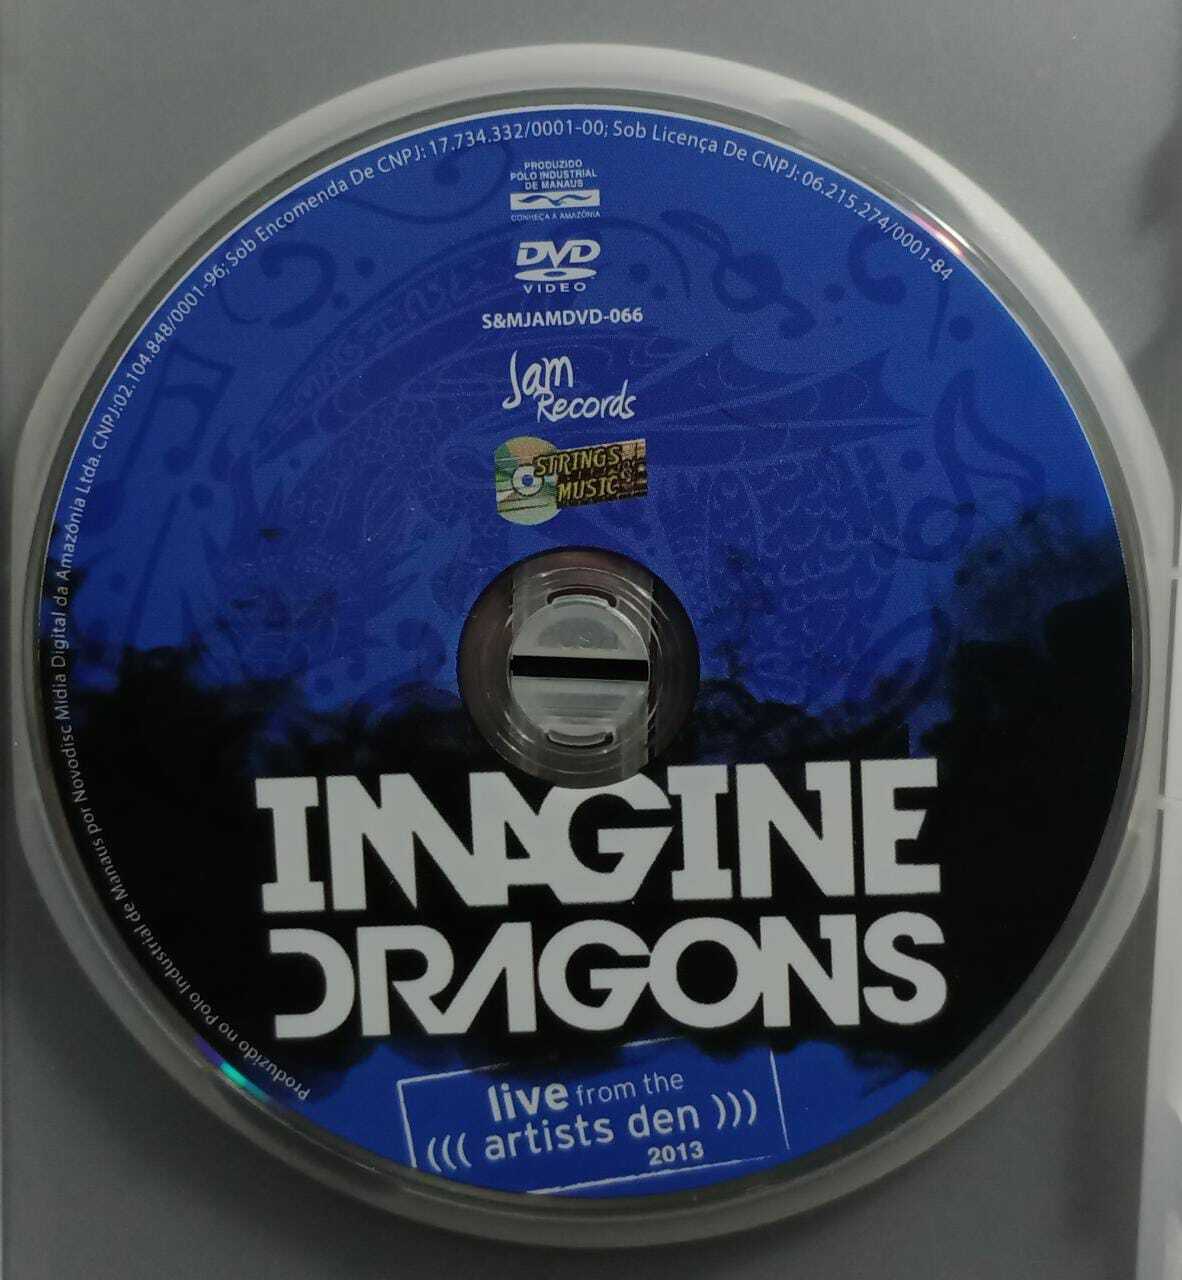 DVD - Imagine Dragons - Live From the Artists Dean 2013